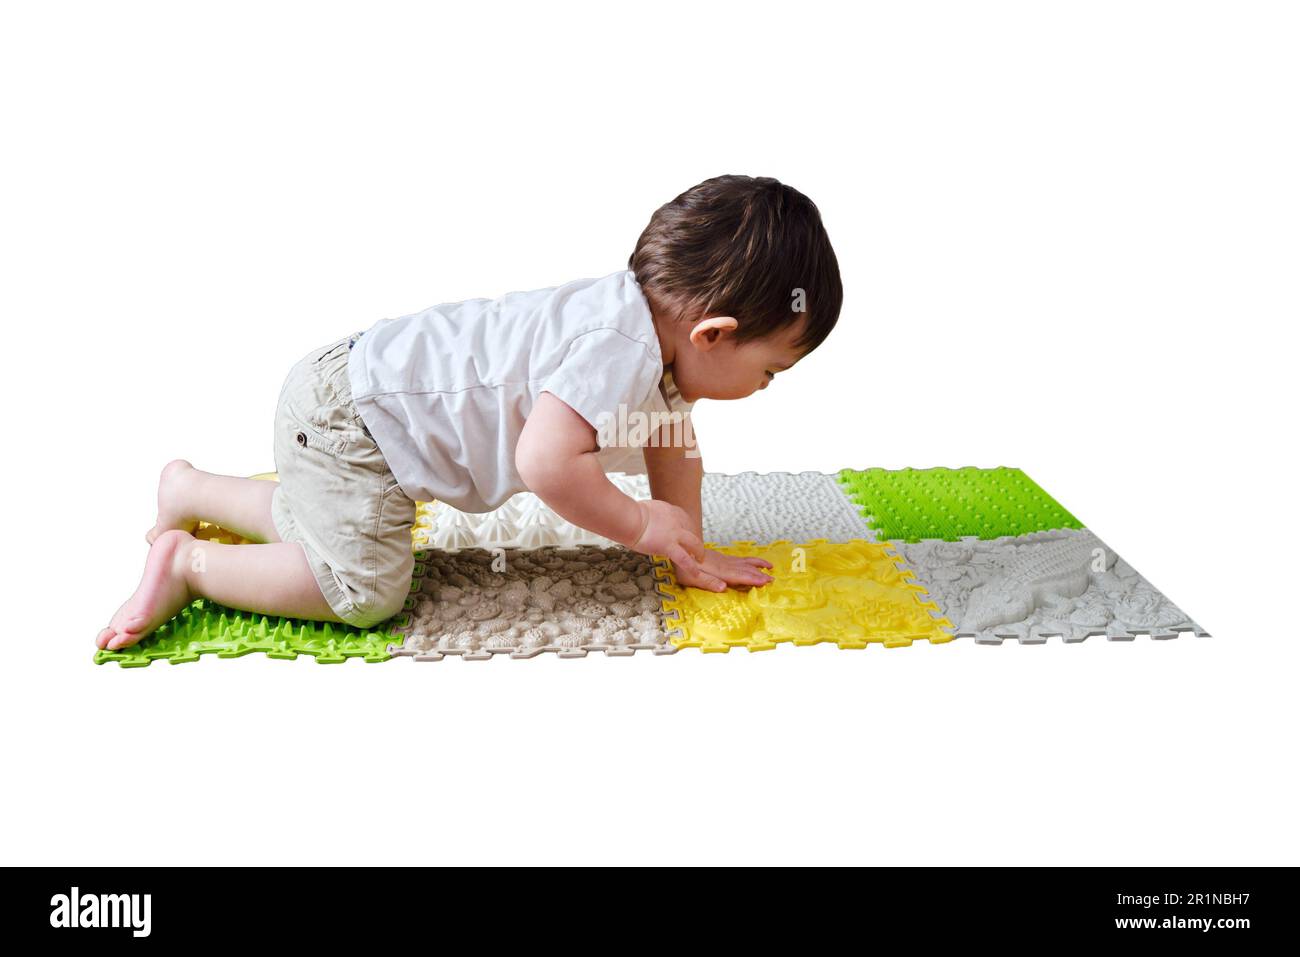 Baby toddler foots close-up on a medical orthopedic mat, isolated on white background. Child legs with flat feet on a medical rug, isolated on white b Stock Photo